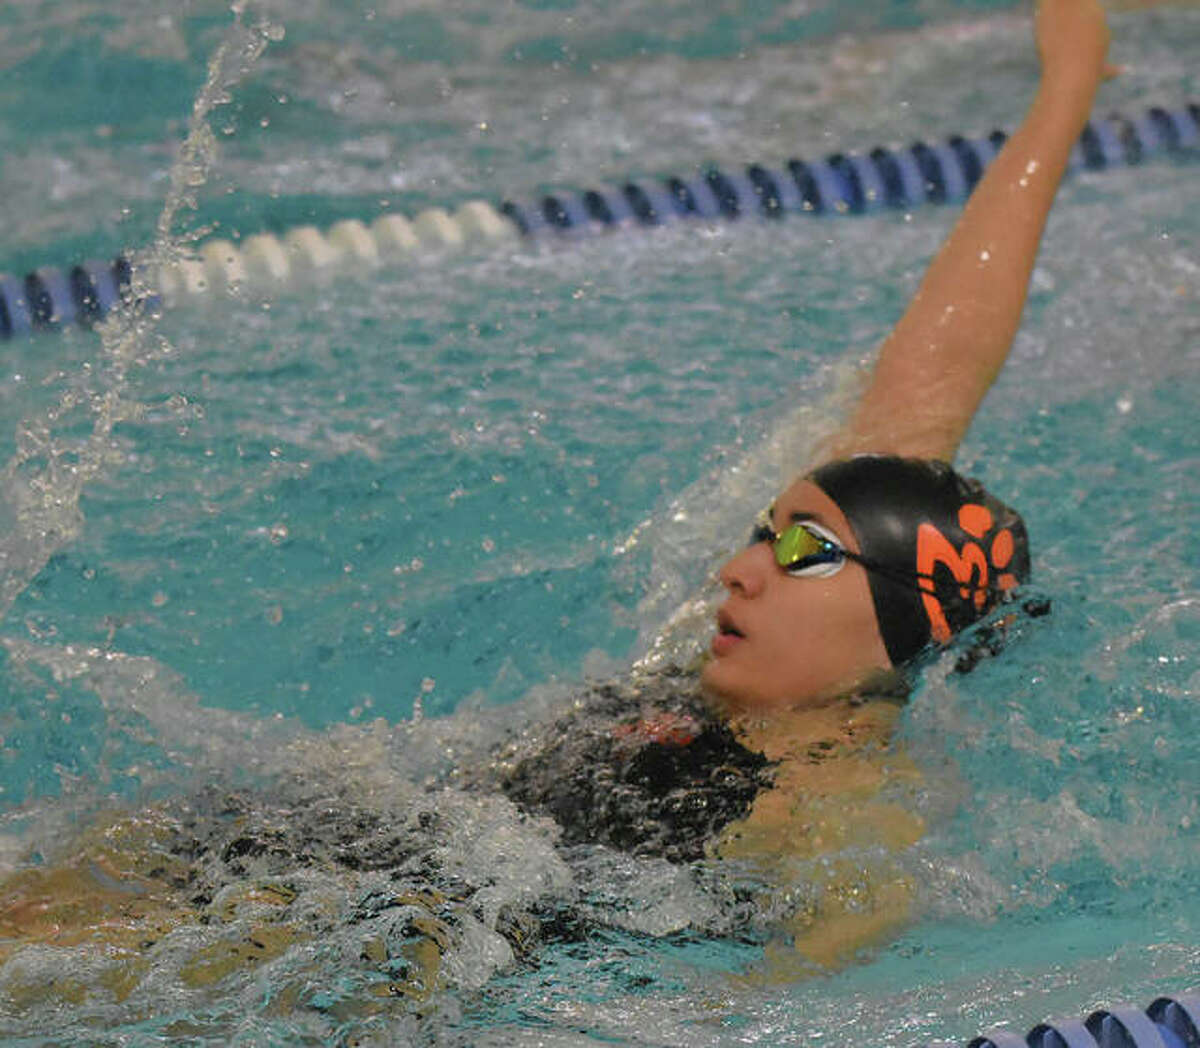 Edwardsville’s Taylor Wilkerson competes in the 100-yard butterfly on Saturday inside the Chuck Fruit Aquatic Center.